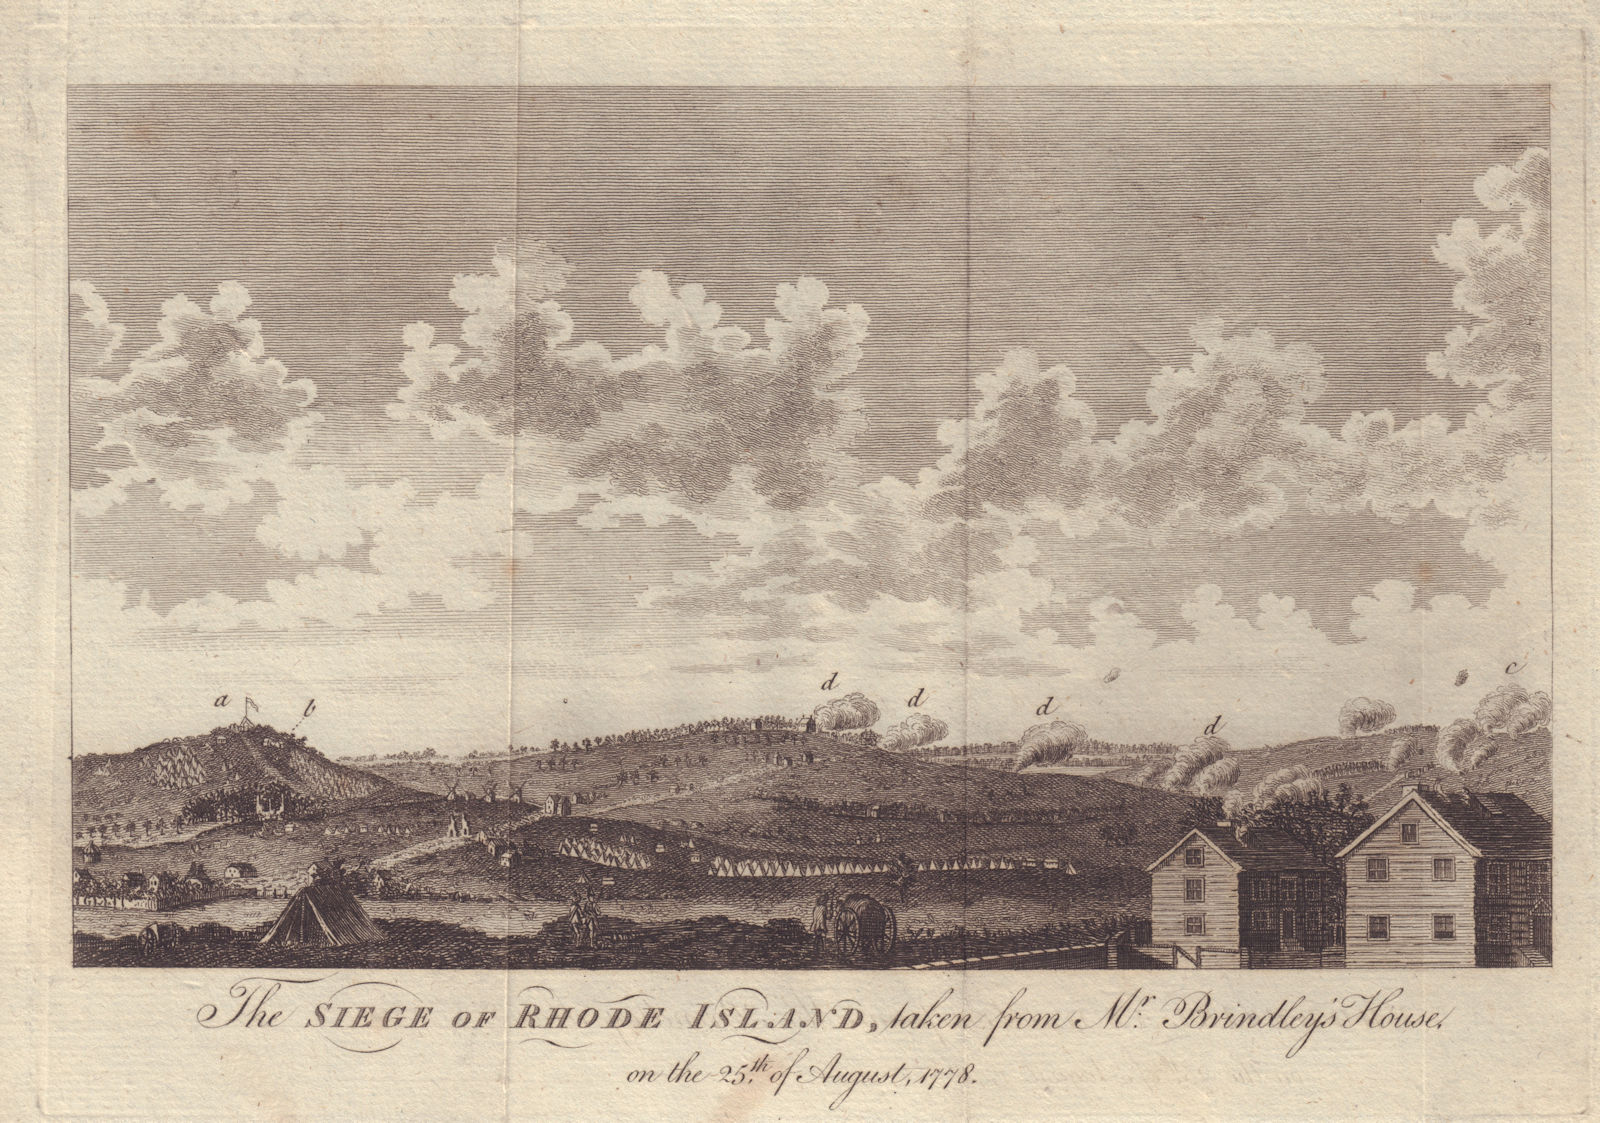 Associate Product The Siege of Rhode Island… from Mr Brindley's House on 25th of August 1778. 1779